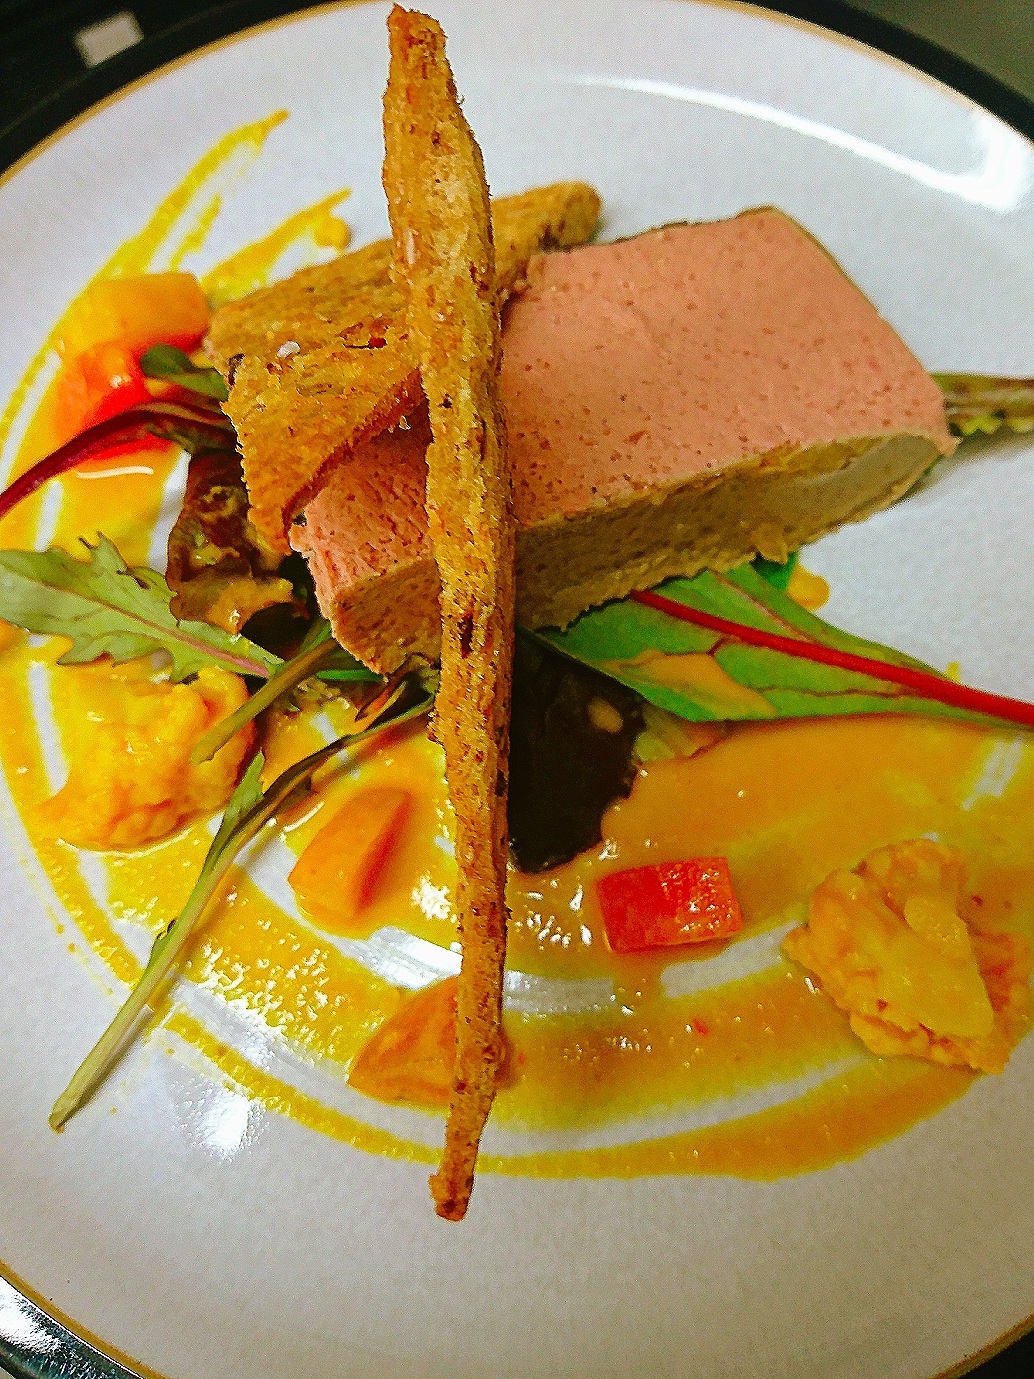 Chicken liver parfait on bed of house leaves, homemade piccalilli, wholemeal wafers